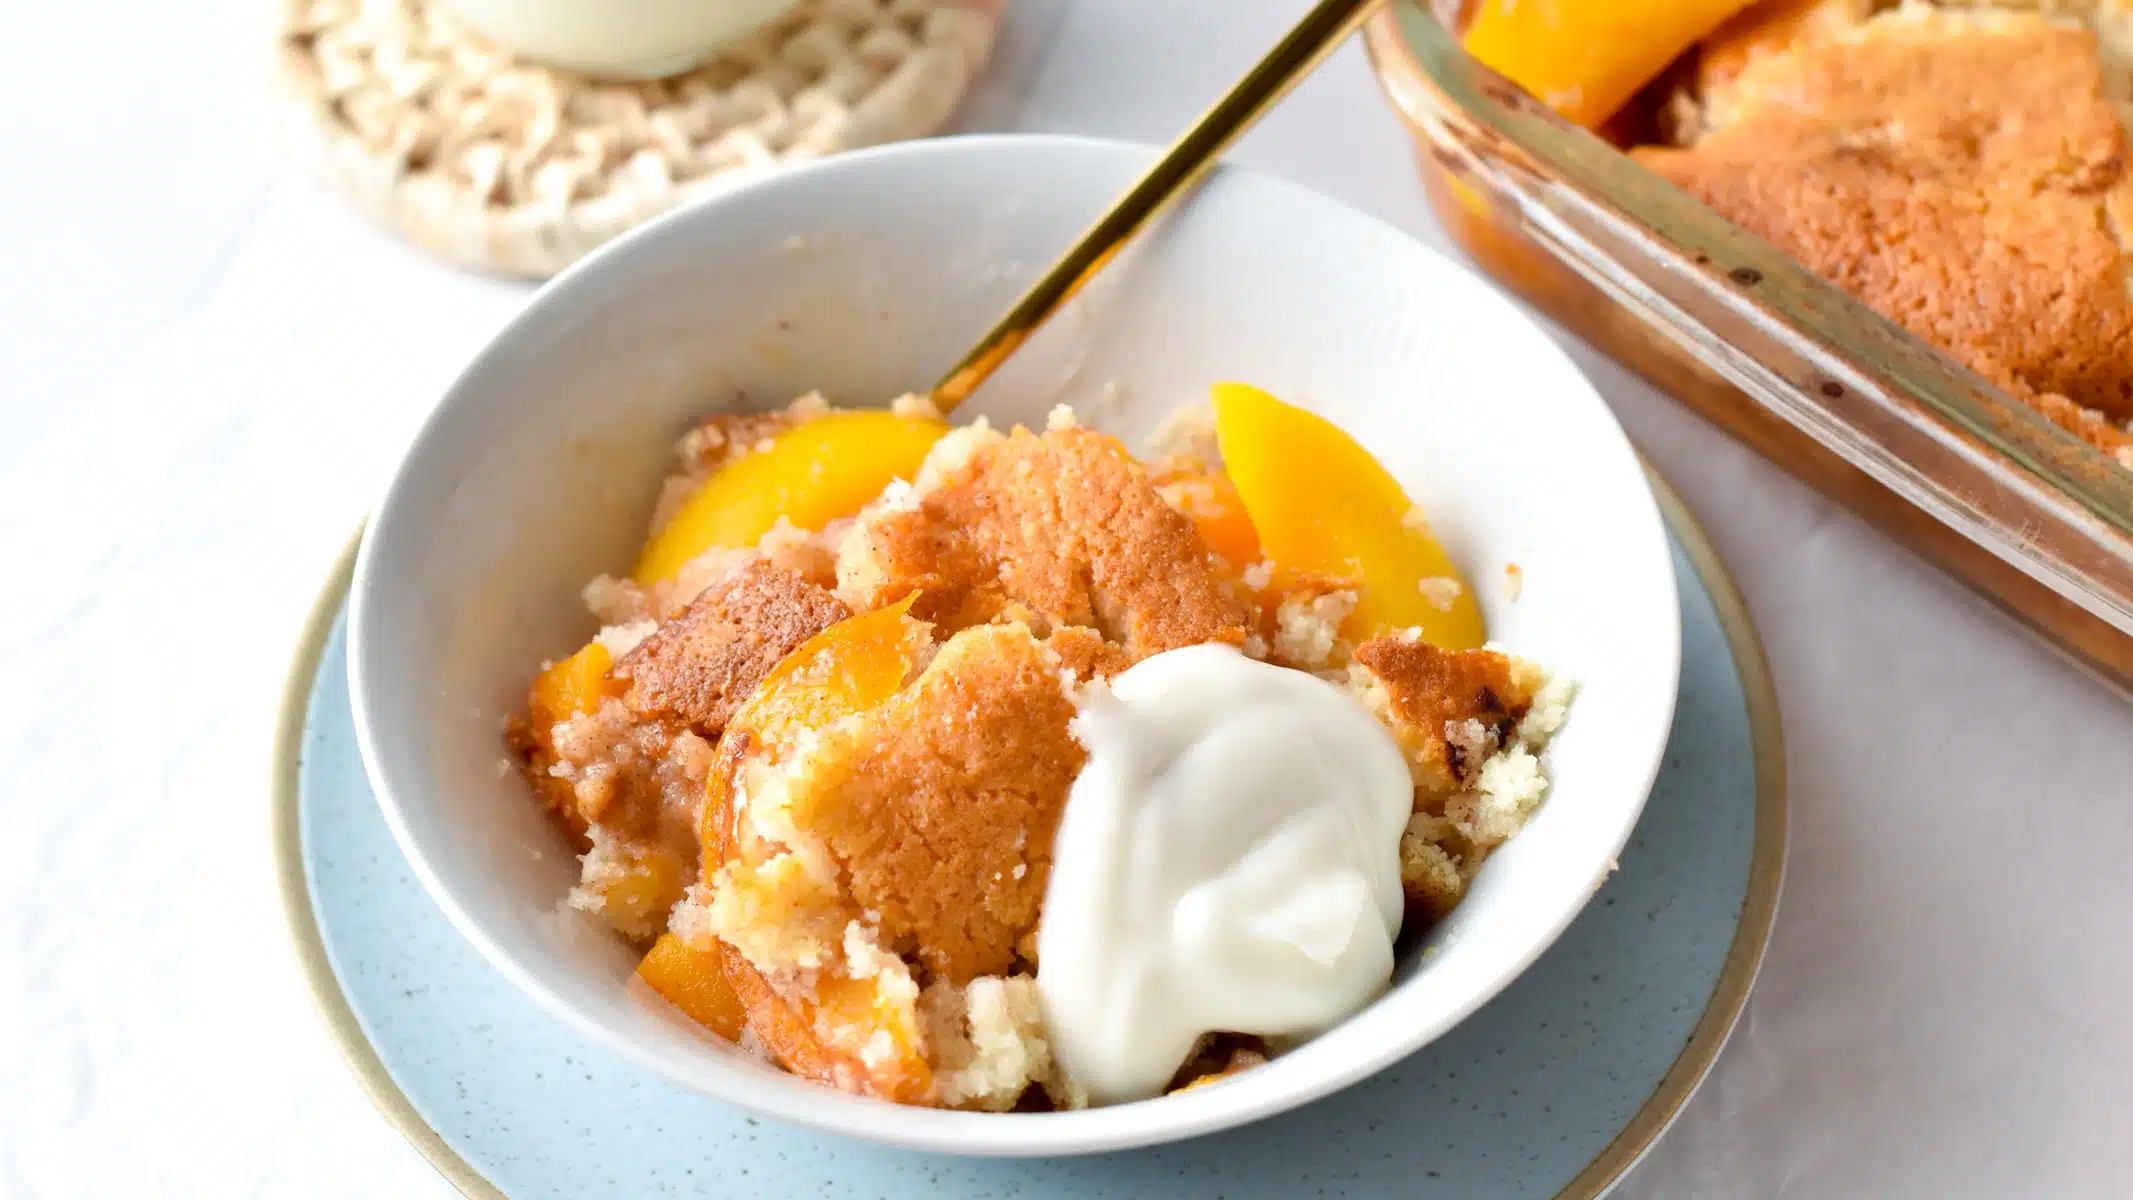 This Peach Cobbler with cake mix is the easiest dessert you will ever make. Plus, you don't need eggs or fancy ingredients to make this easy cobbler recipe, and barely 10 minutes to put together.